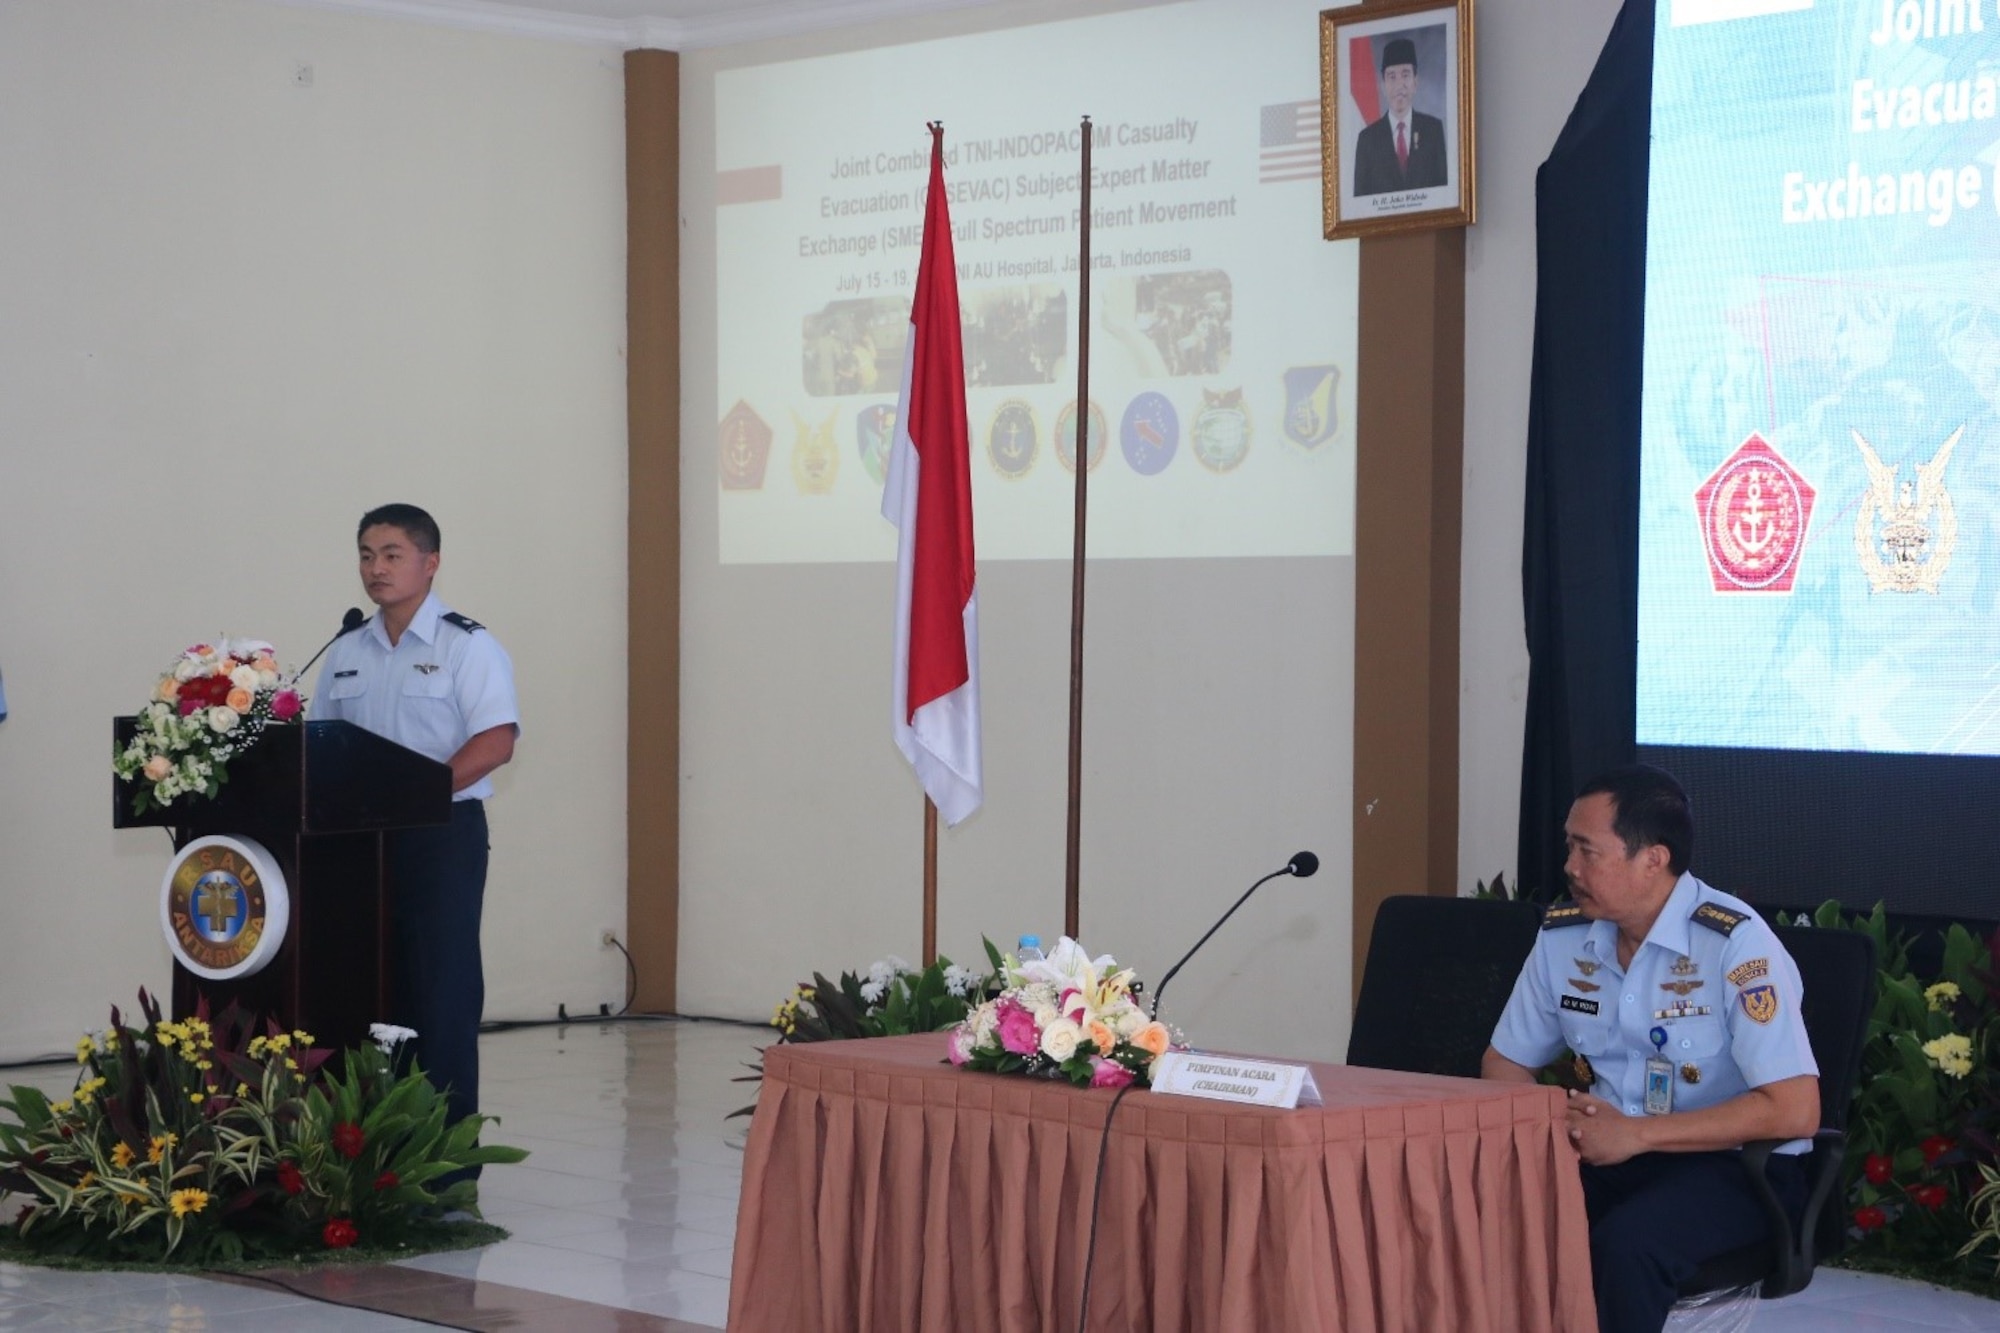 U.S. Air Force Dr. (Lt. Col.) William Chu, Pacific Air Forces surgeon general and international health specialist and Indonesian National Armed Forces (TNI) Maj. Gen. Ben Yua Rimba, TNI AU (Air Force) during the opening ceremony of the bilateral-joint TNI-Indo-Pacific Command Casualty Evacuation Subject Expert Matter Exchange on full spectrum patient movement. (Courtesy Photo)